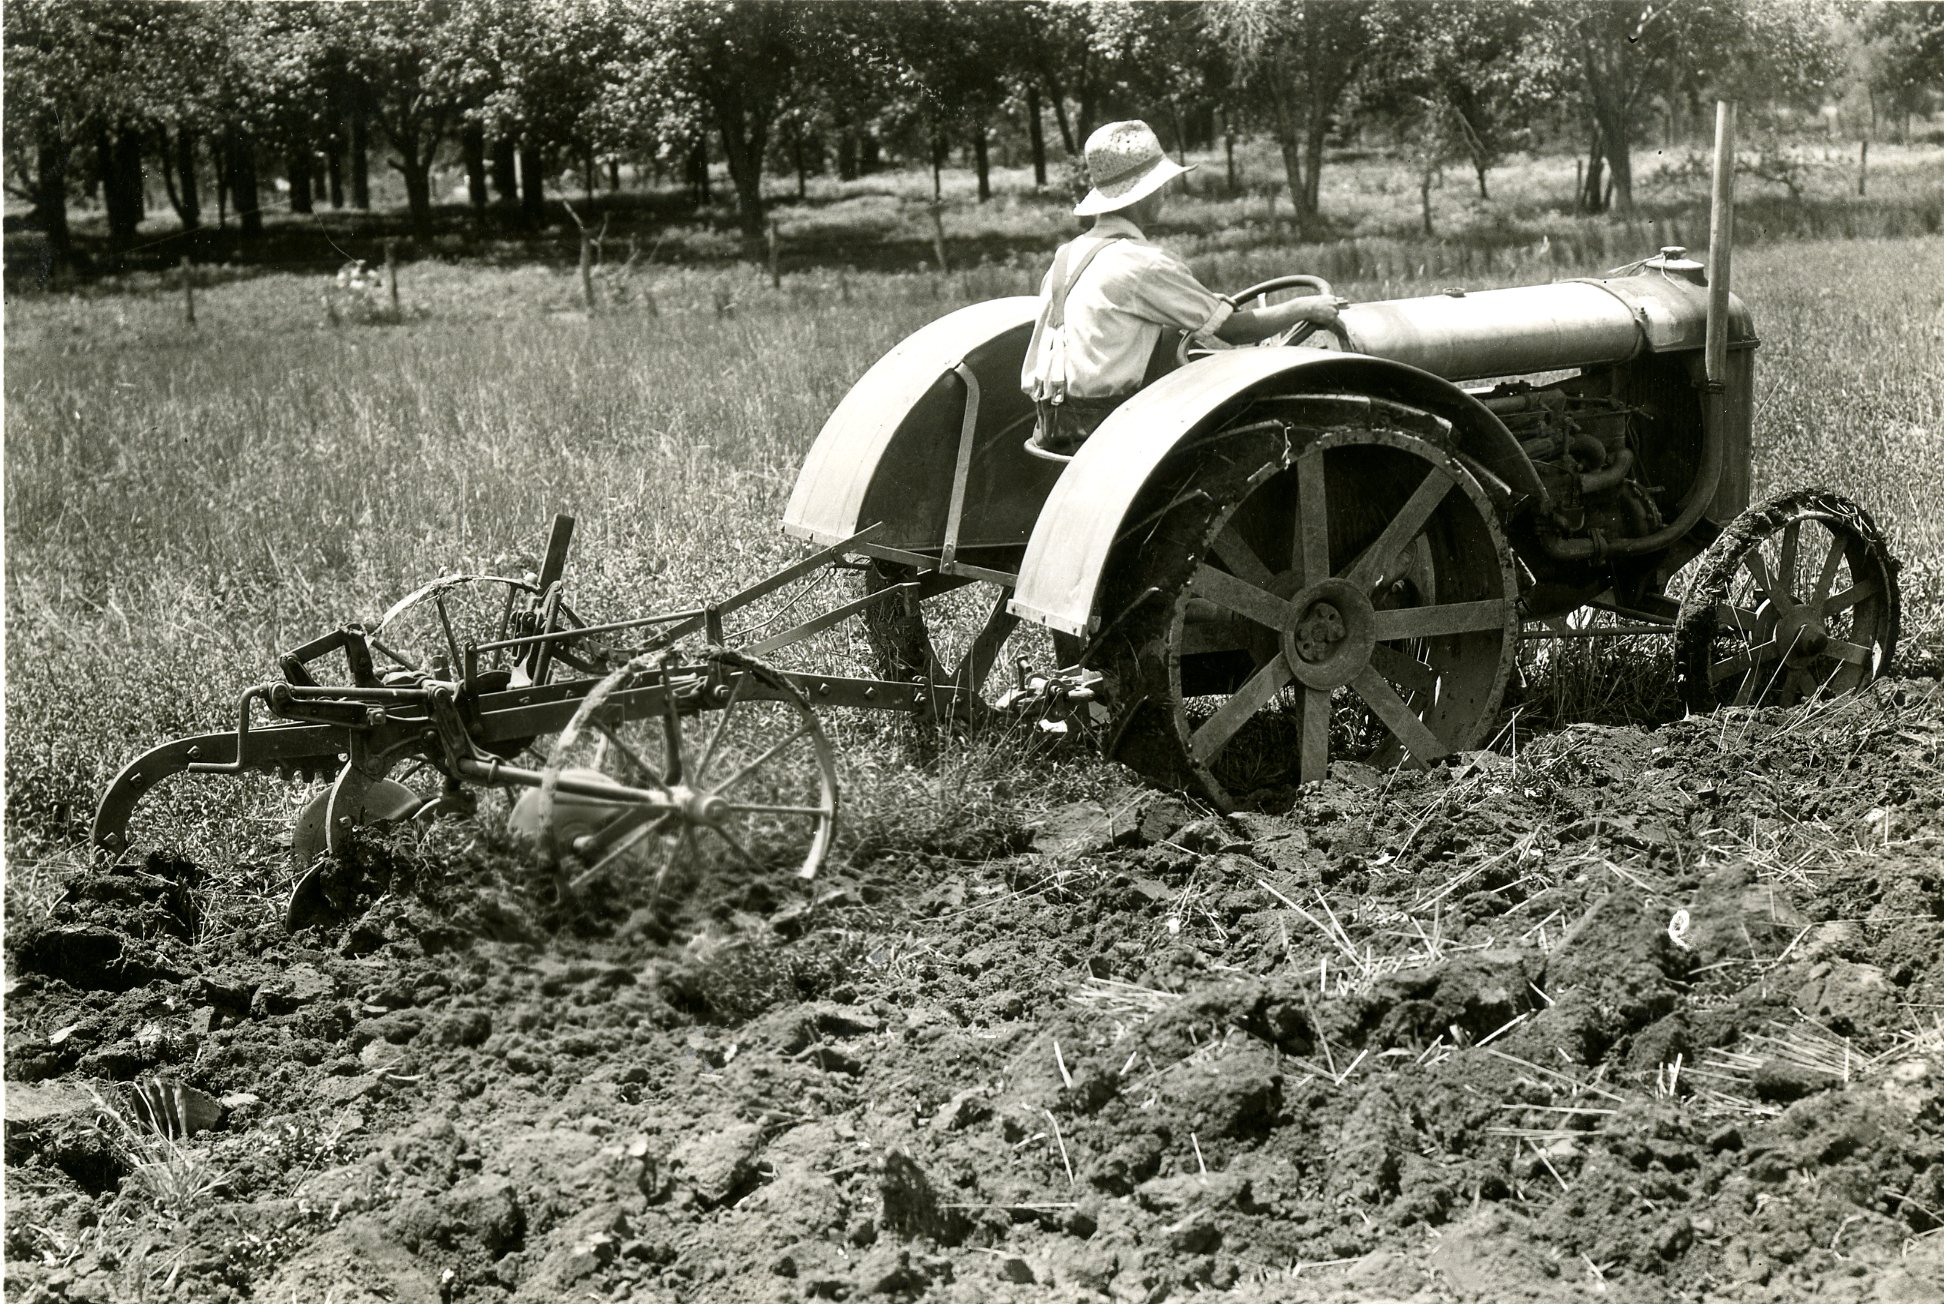 Farm worker riding on tractor